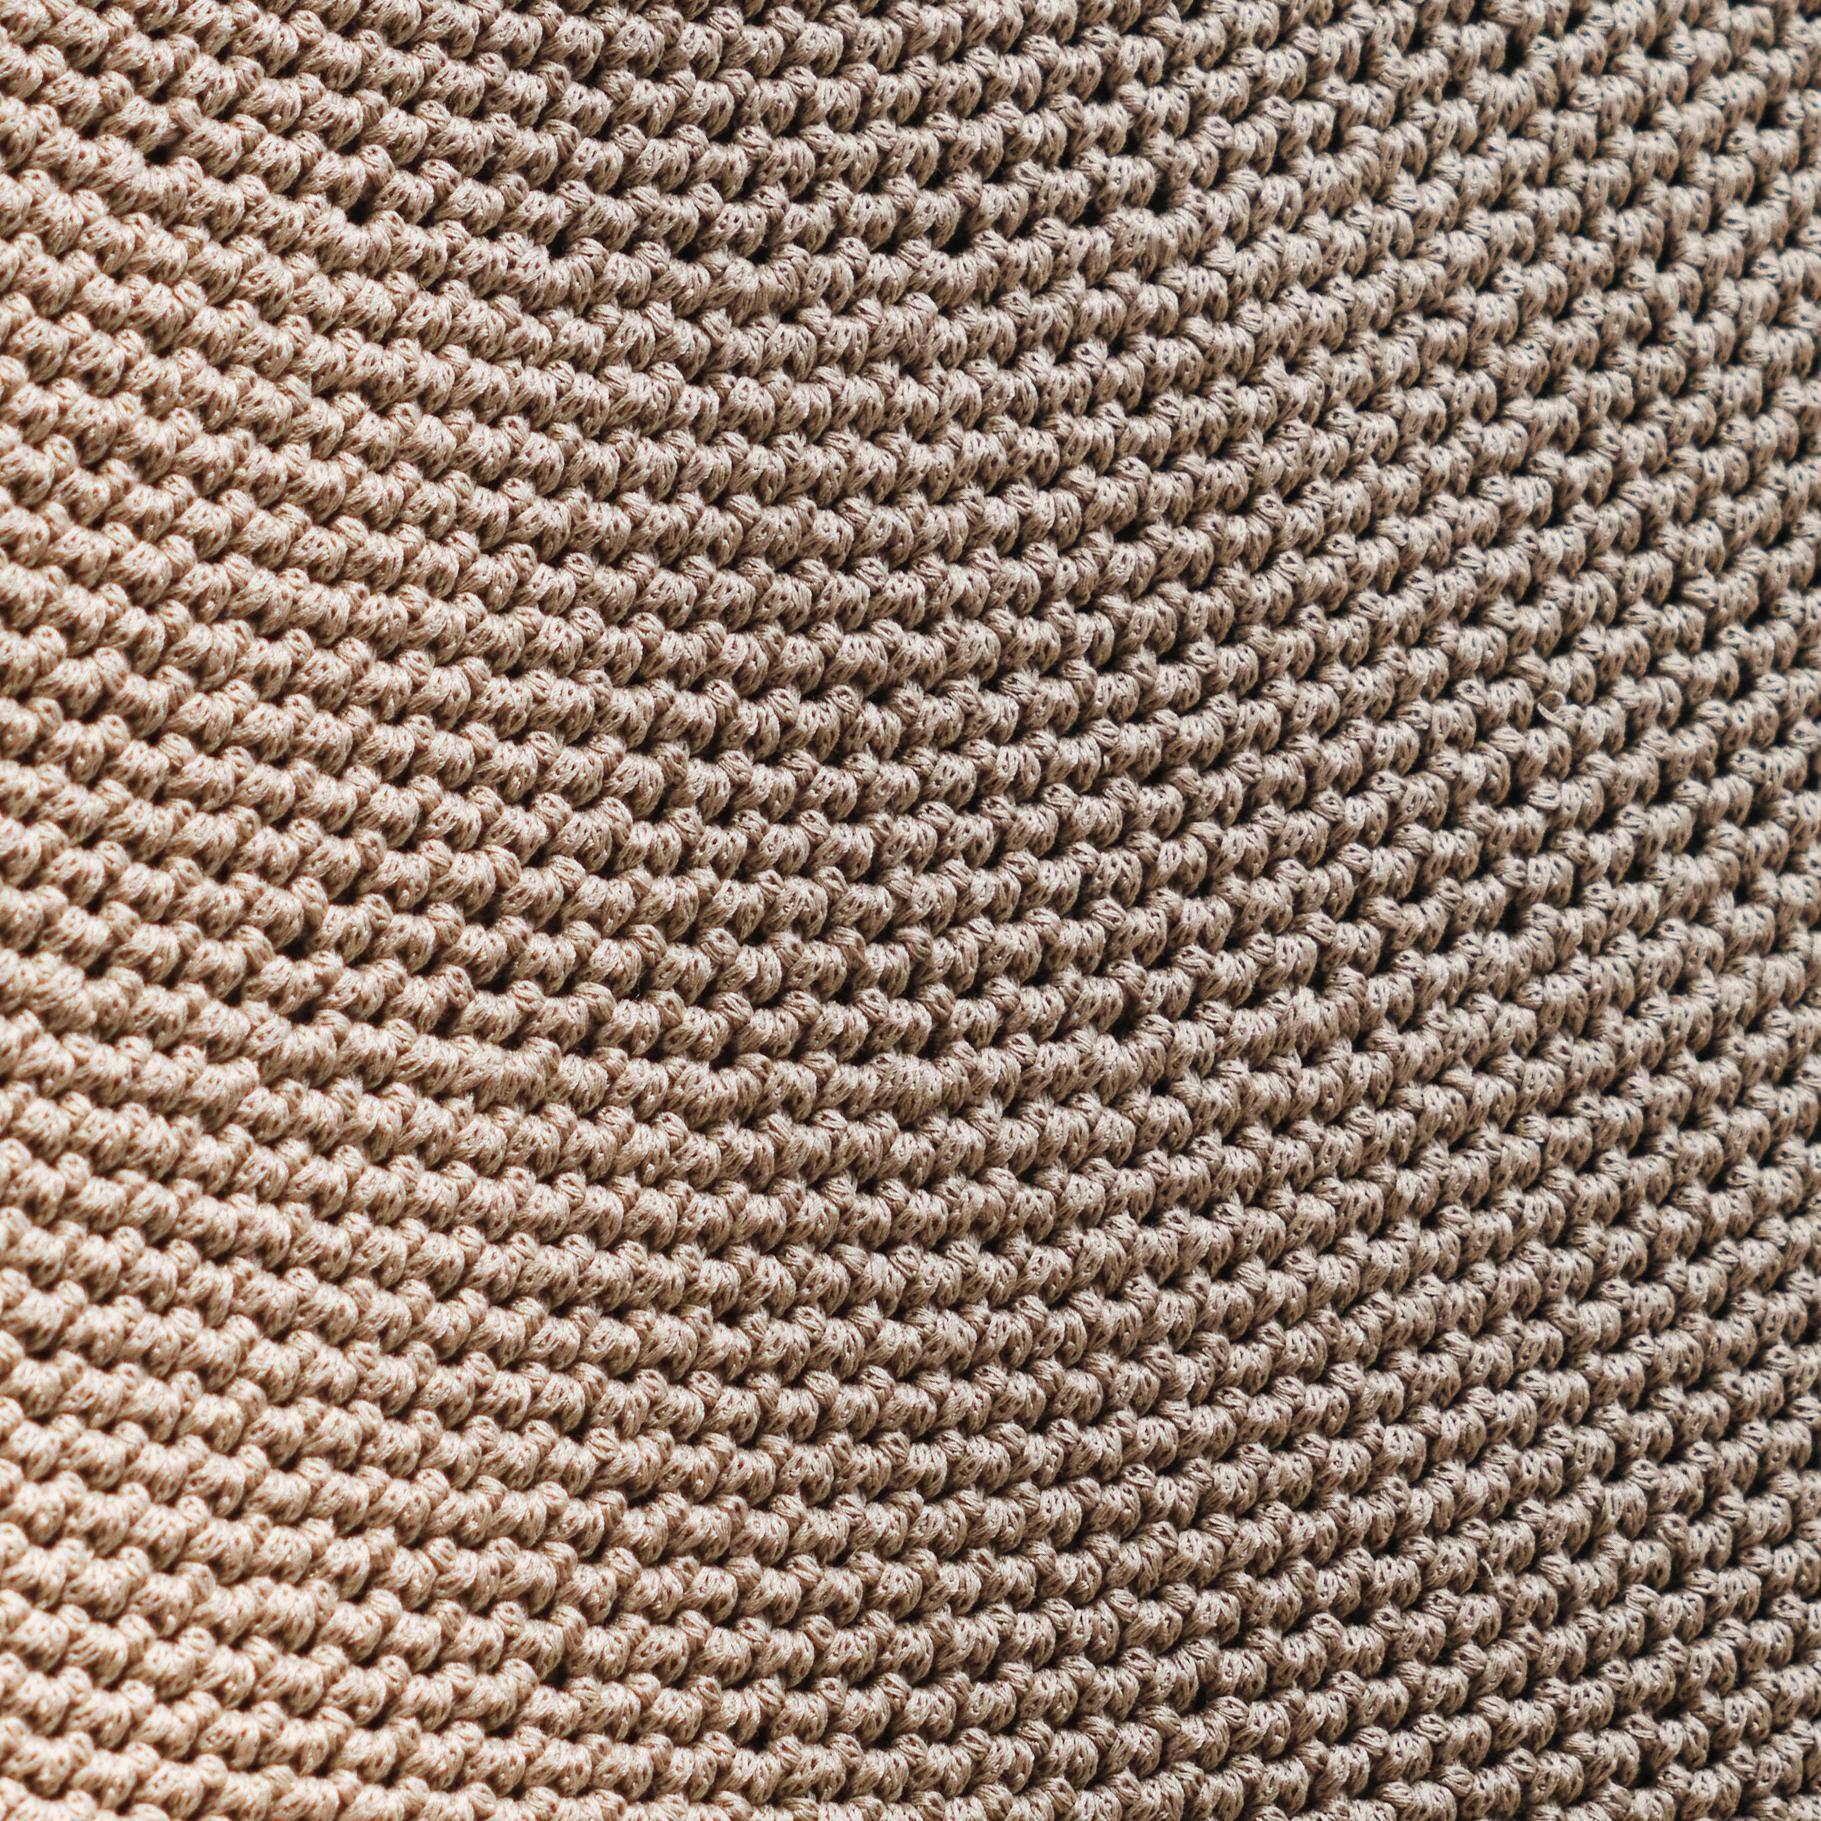 British SS01 Pendant Light Ø80cm/31.5in, Hand Crocheted in 100% Egyptian Cotton For Sale